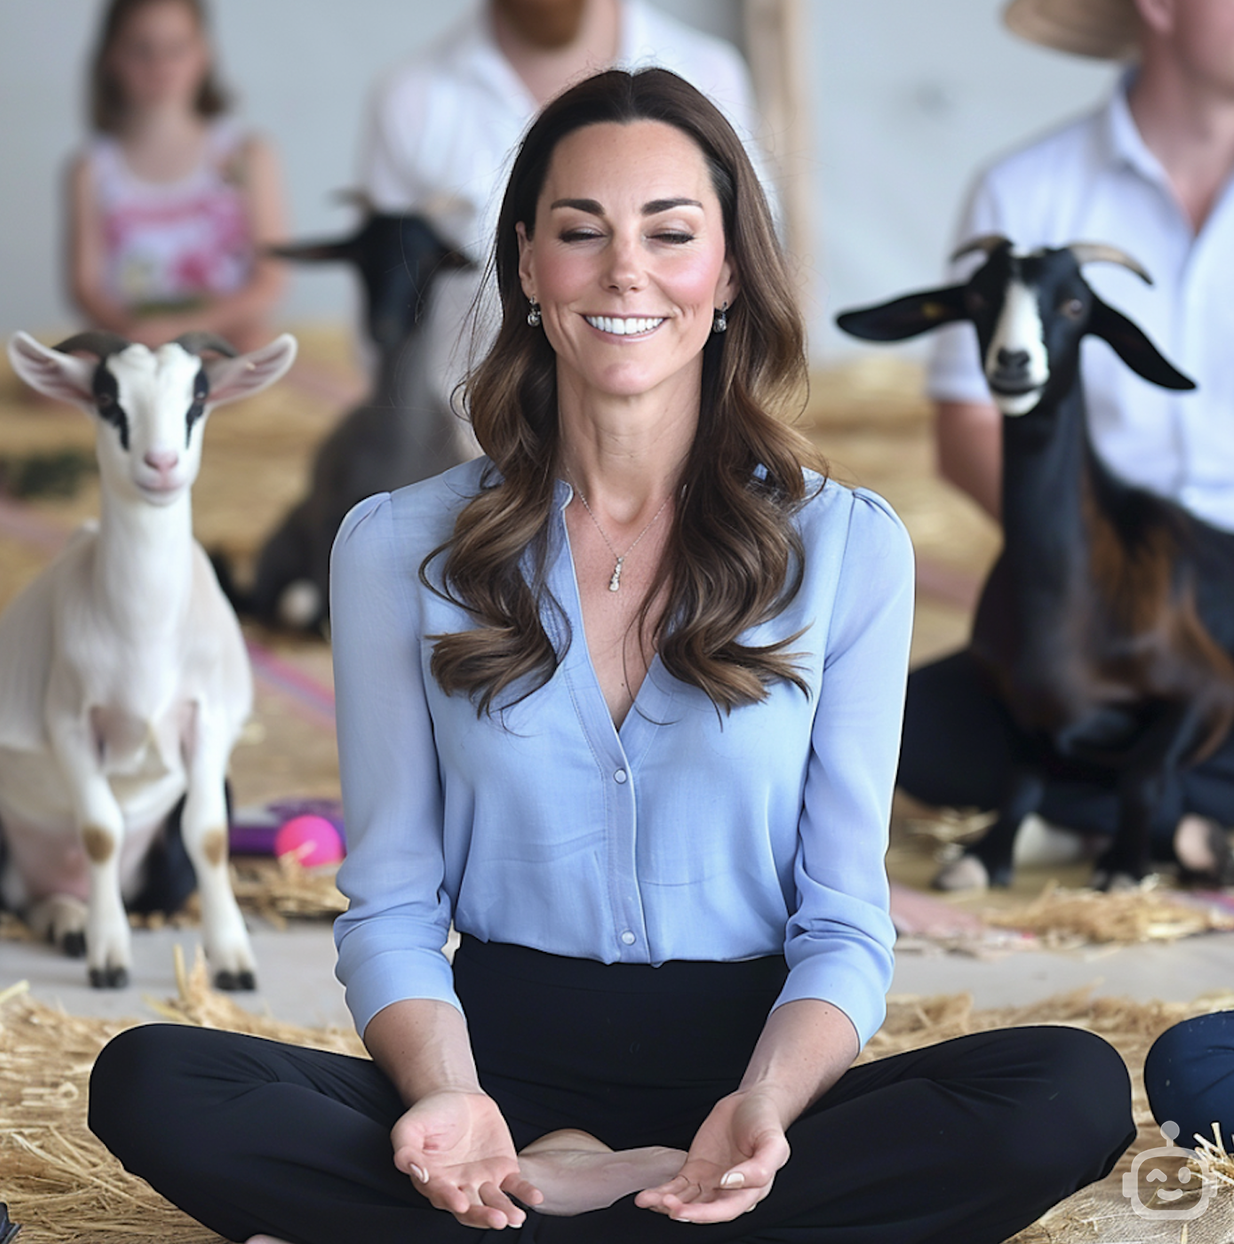 Kate Middleton in a relaxed pose seated with legs crossed, surrounded by goats at an event